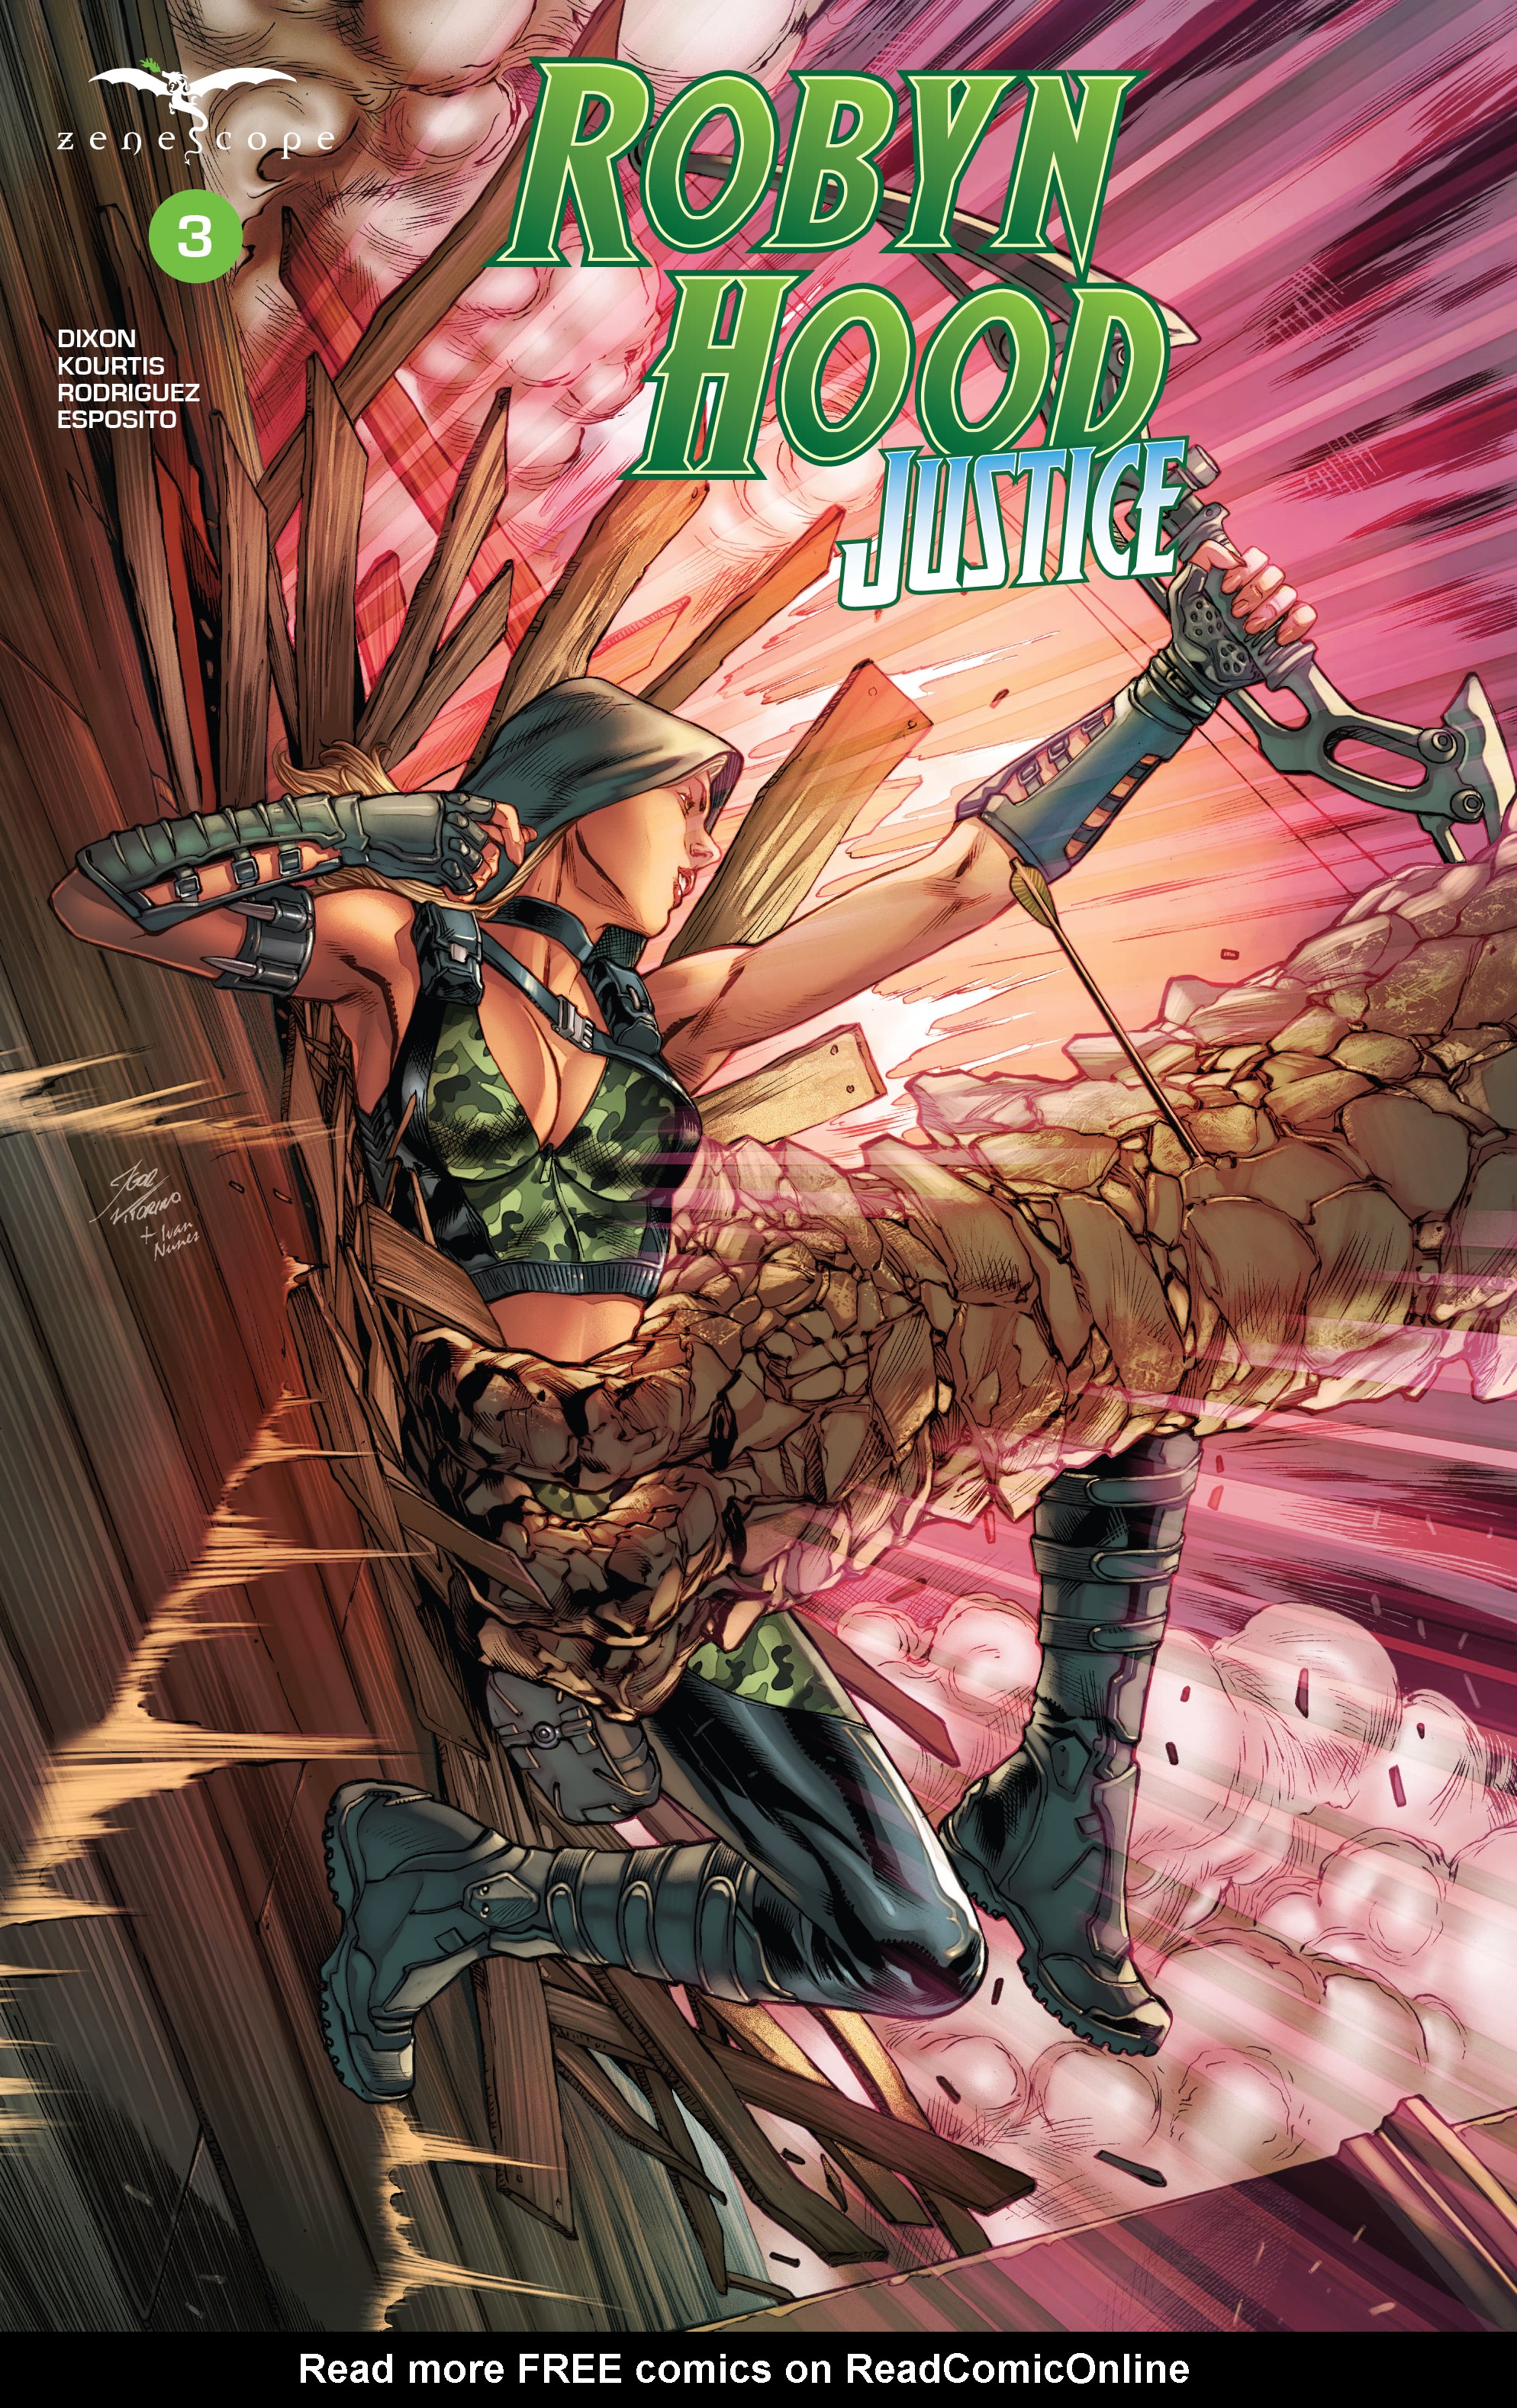 Read online Robyn Hood: Justice comic -  Issue #3 - 1